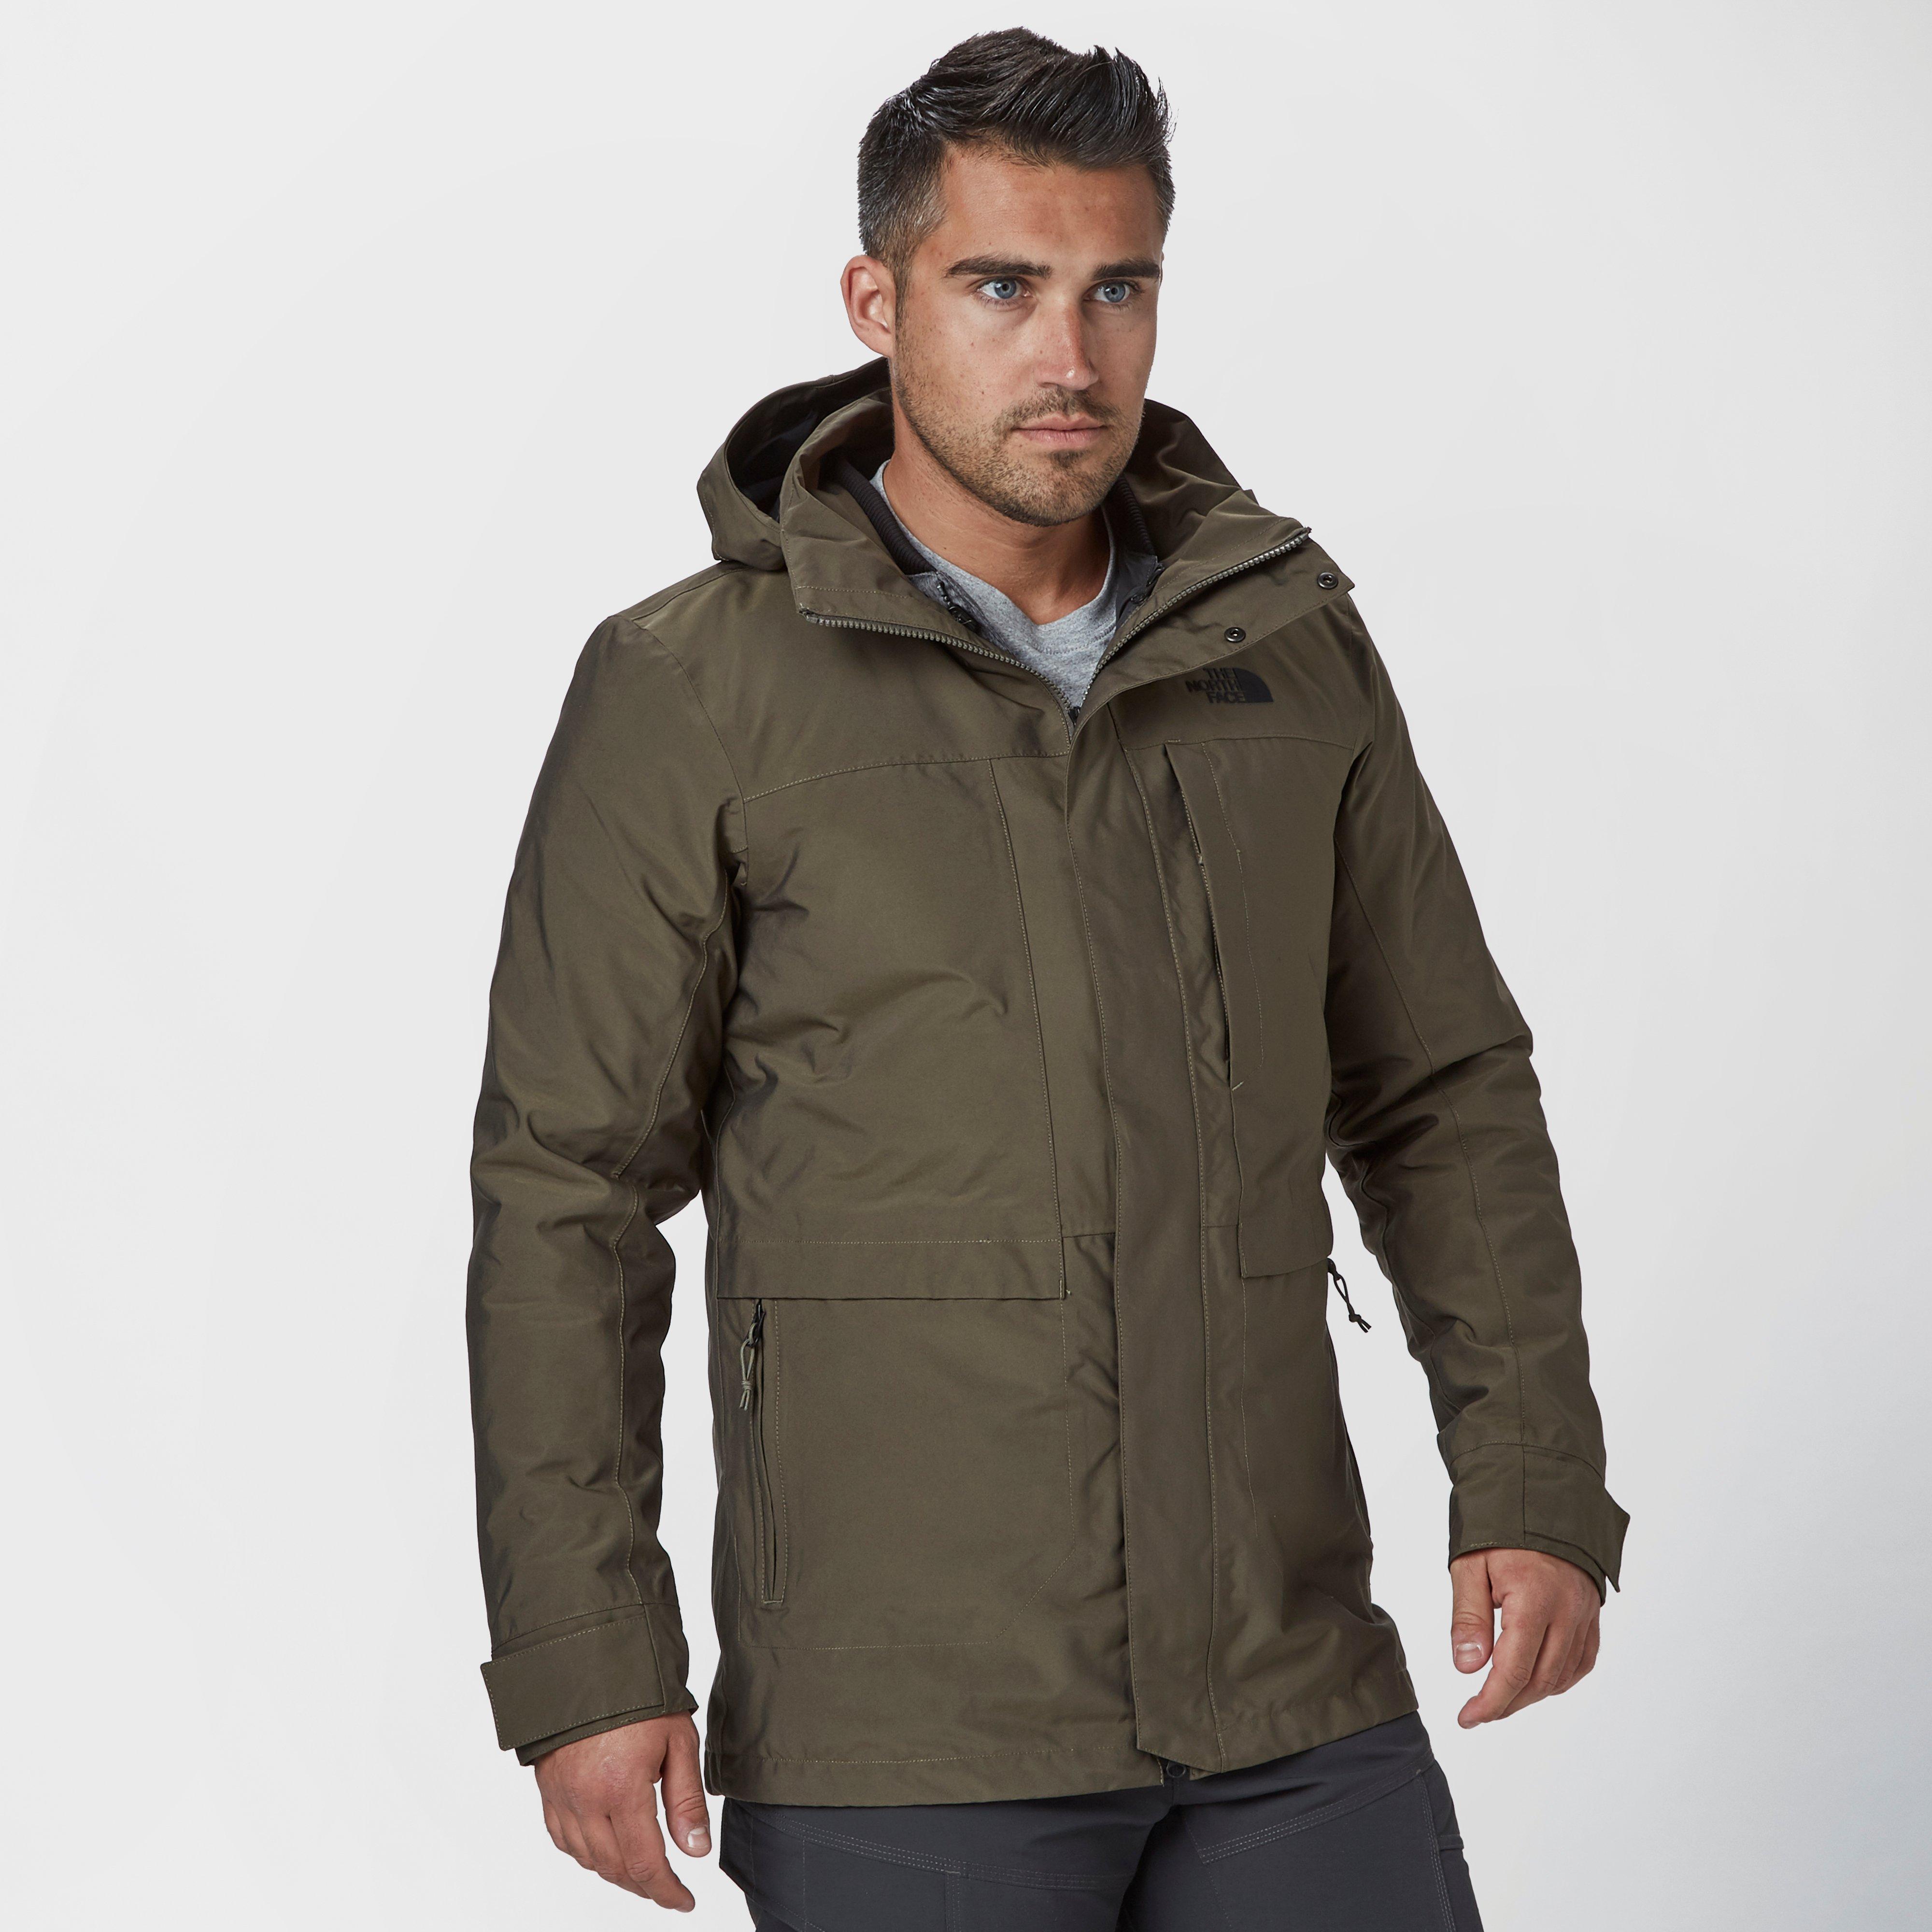 North Face Men's Anti-Freeze Triclimate 